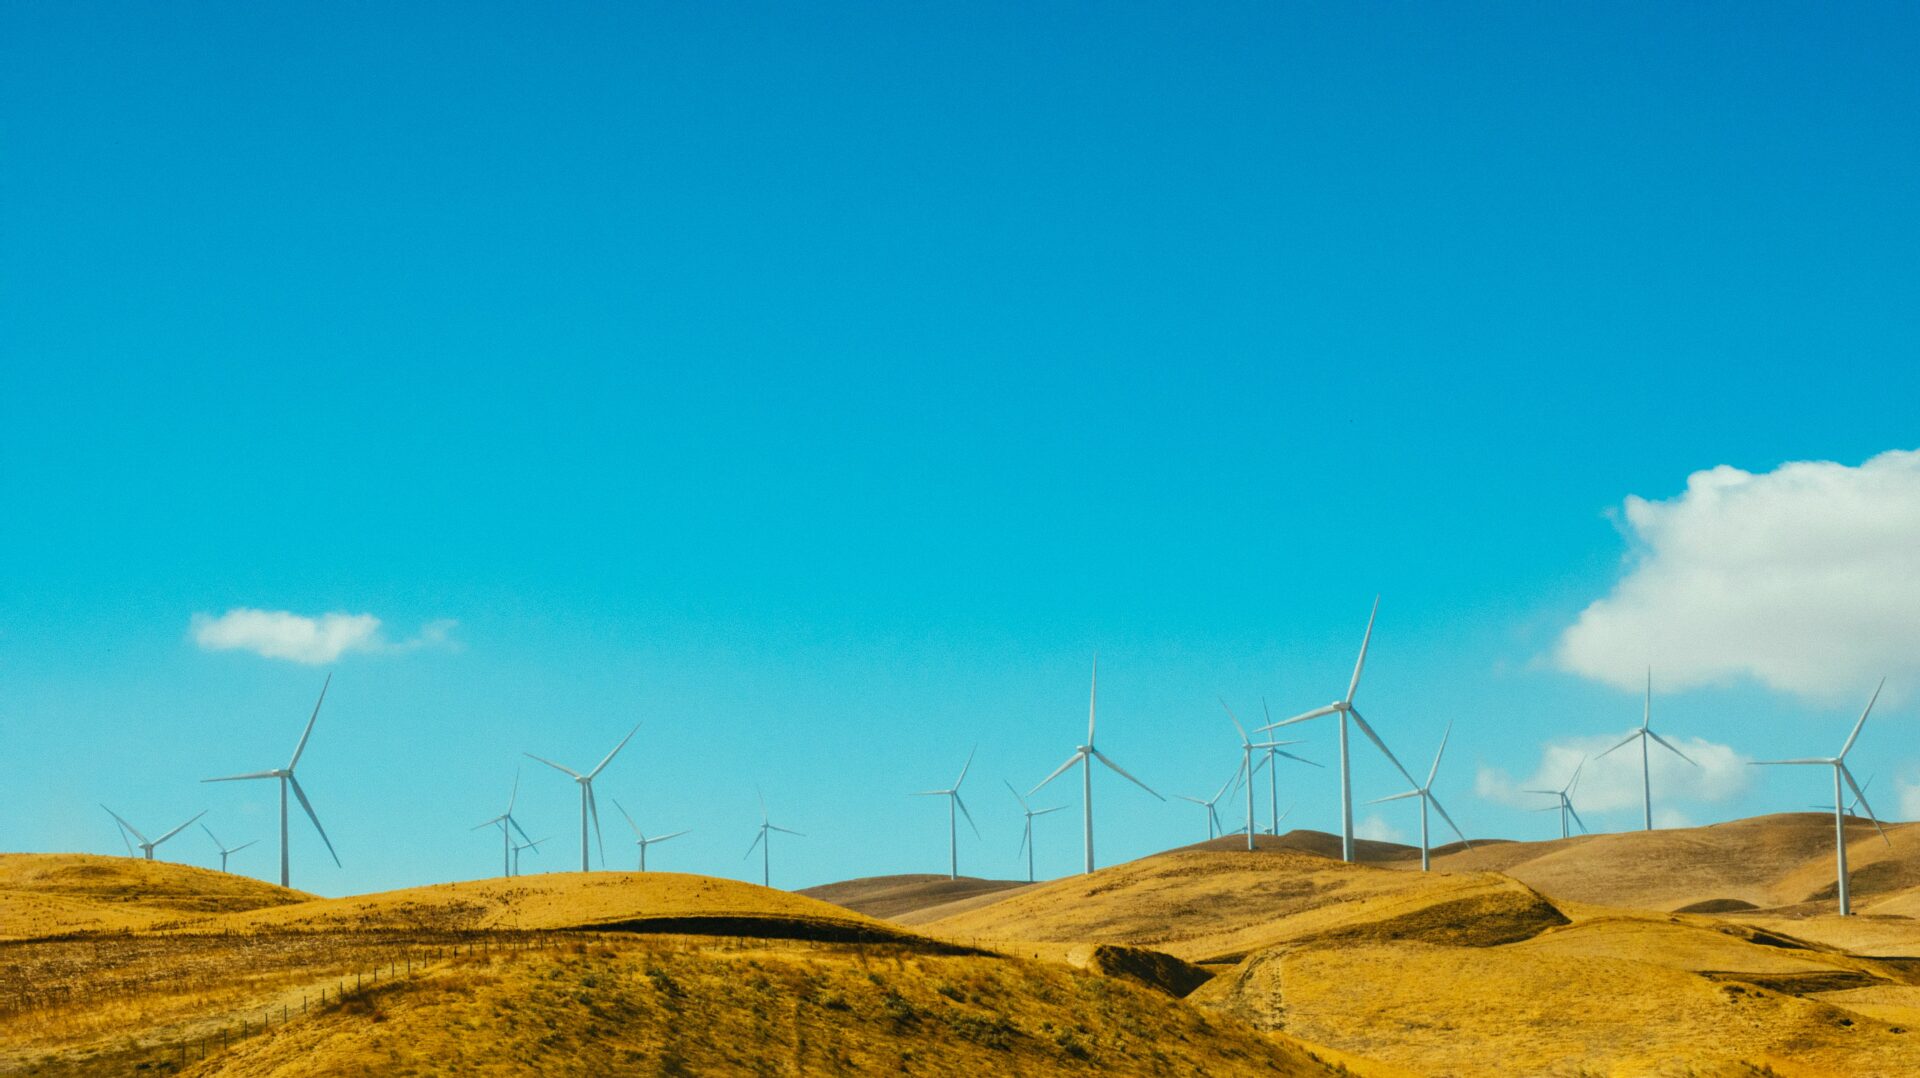 The European Bank for Reconstruction and Development (EBRD) will provide a long-term loan of up to US$105 million for the development, construction, and operation of 240 MW wind farms in Khizi and Absheron regions.